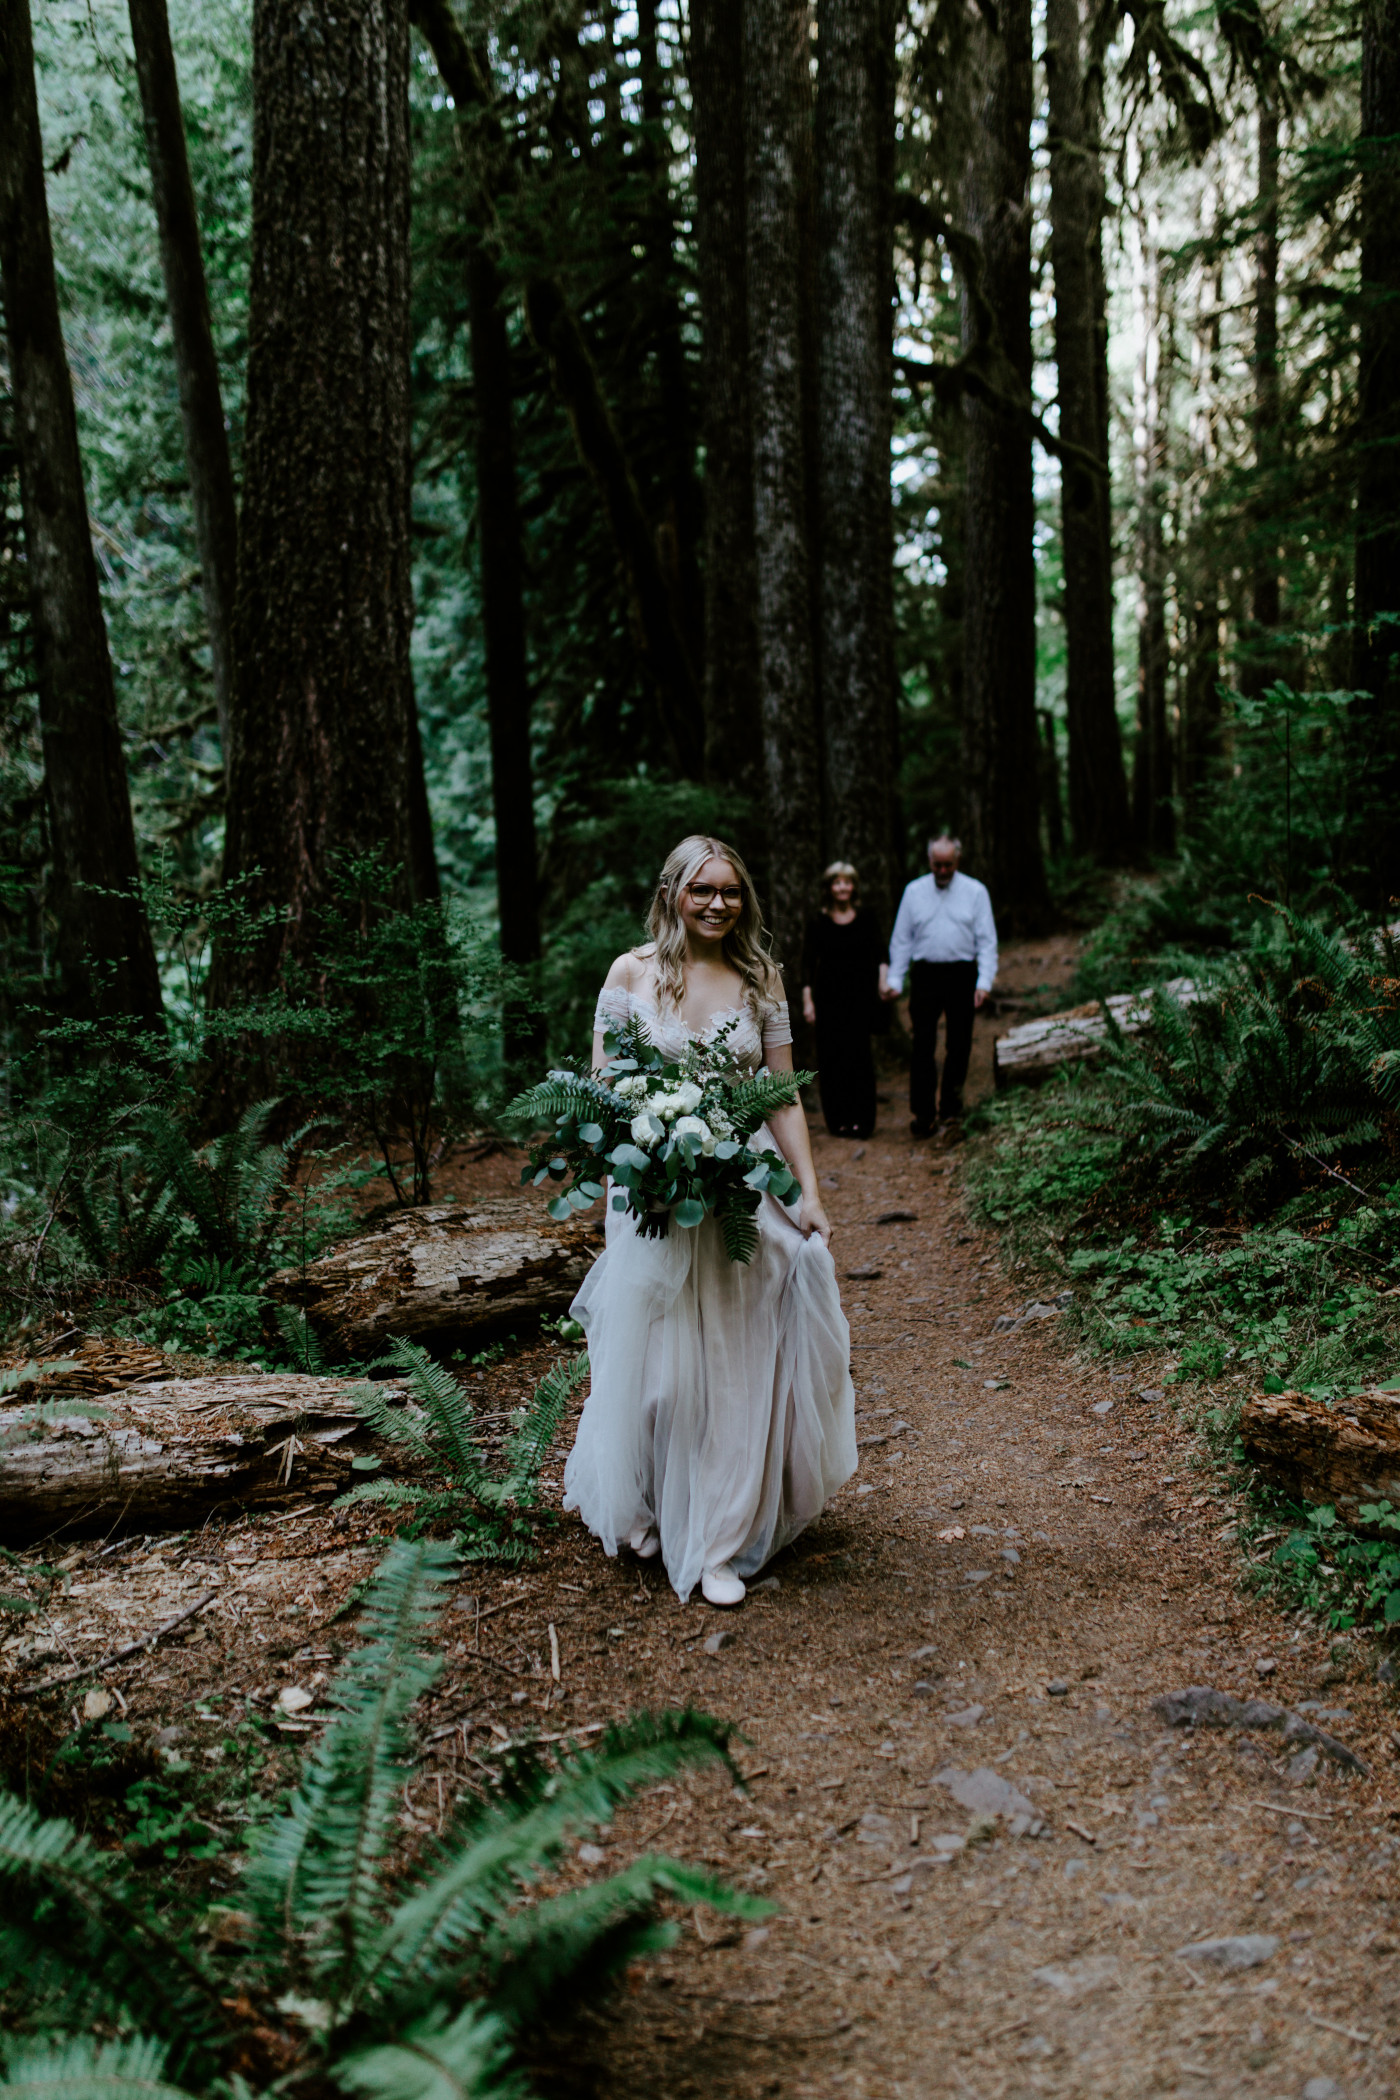 Kylie walks through the woods of Mount Hoods to her ceremony spot.